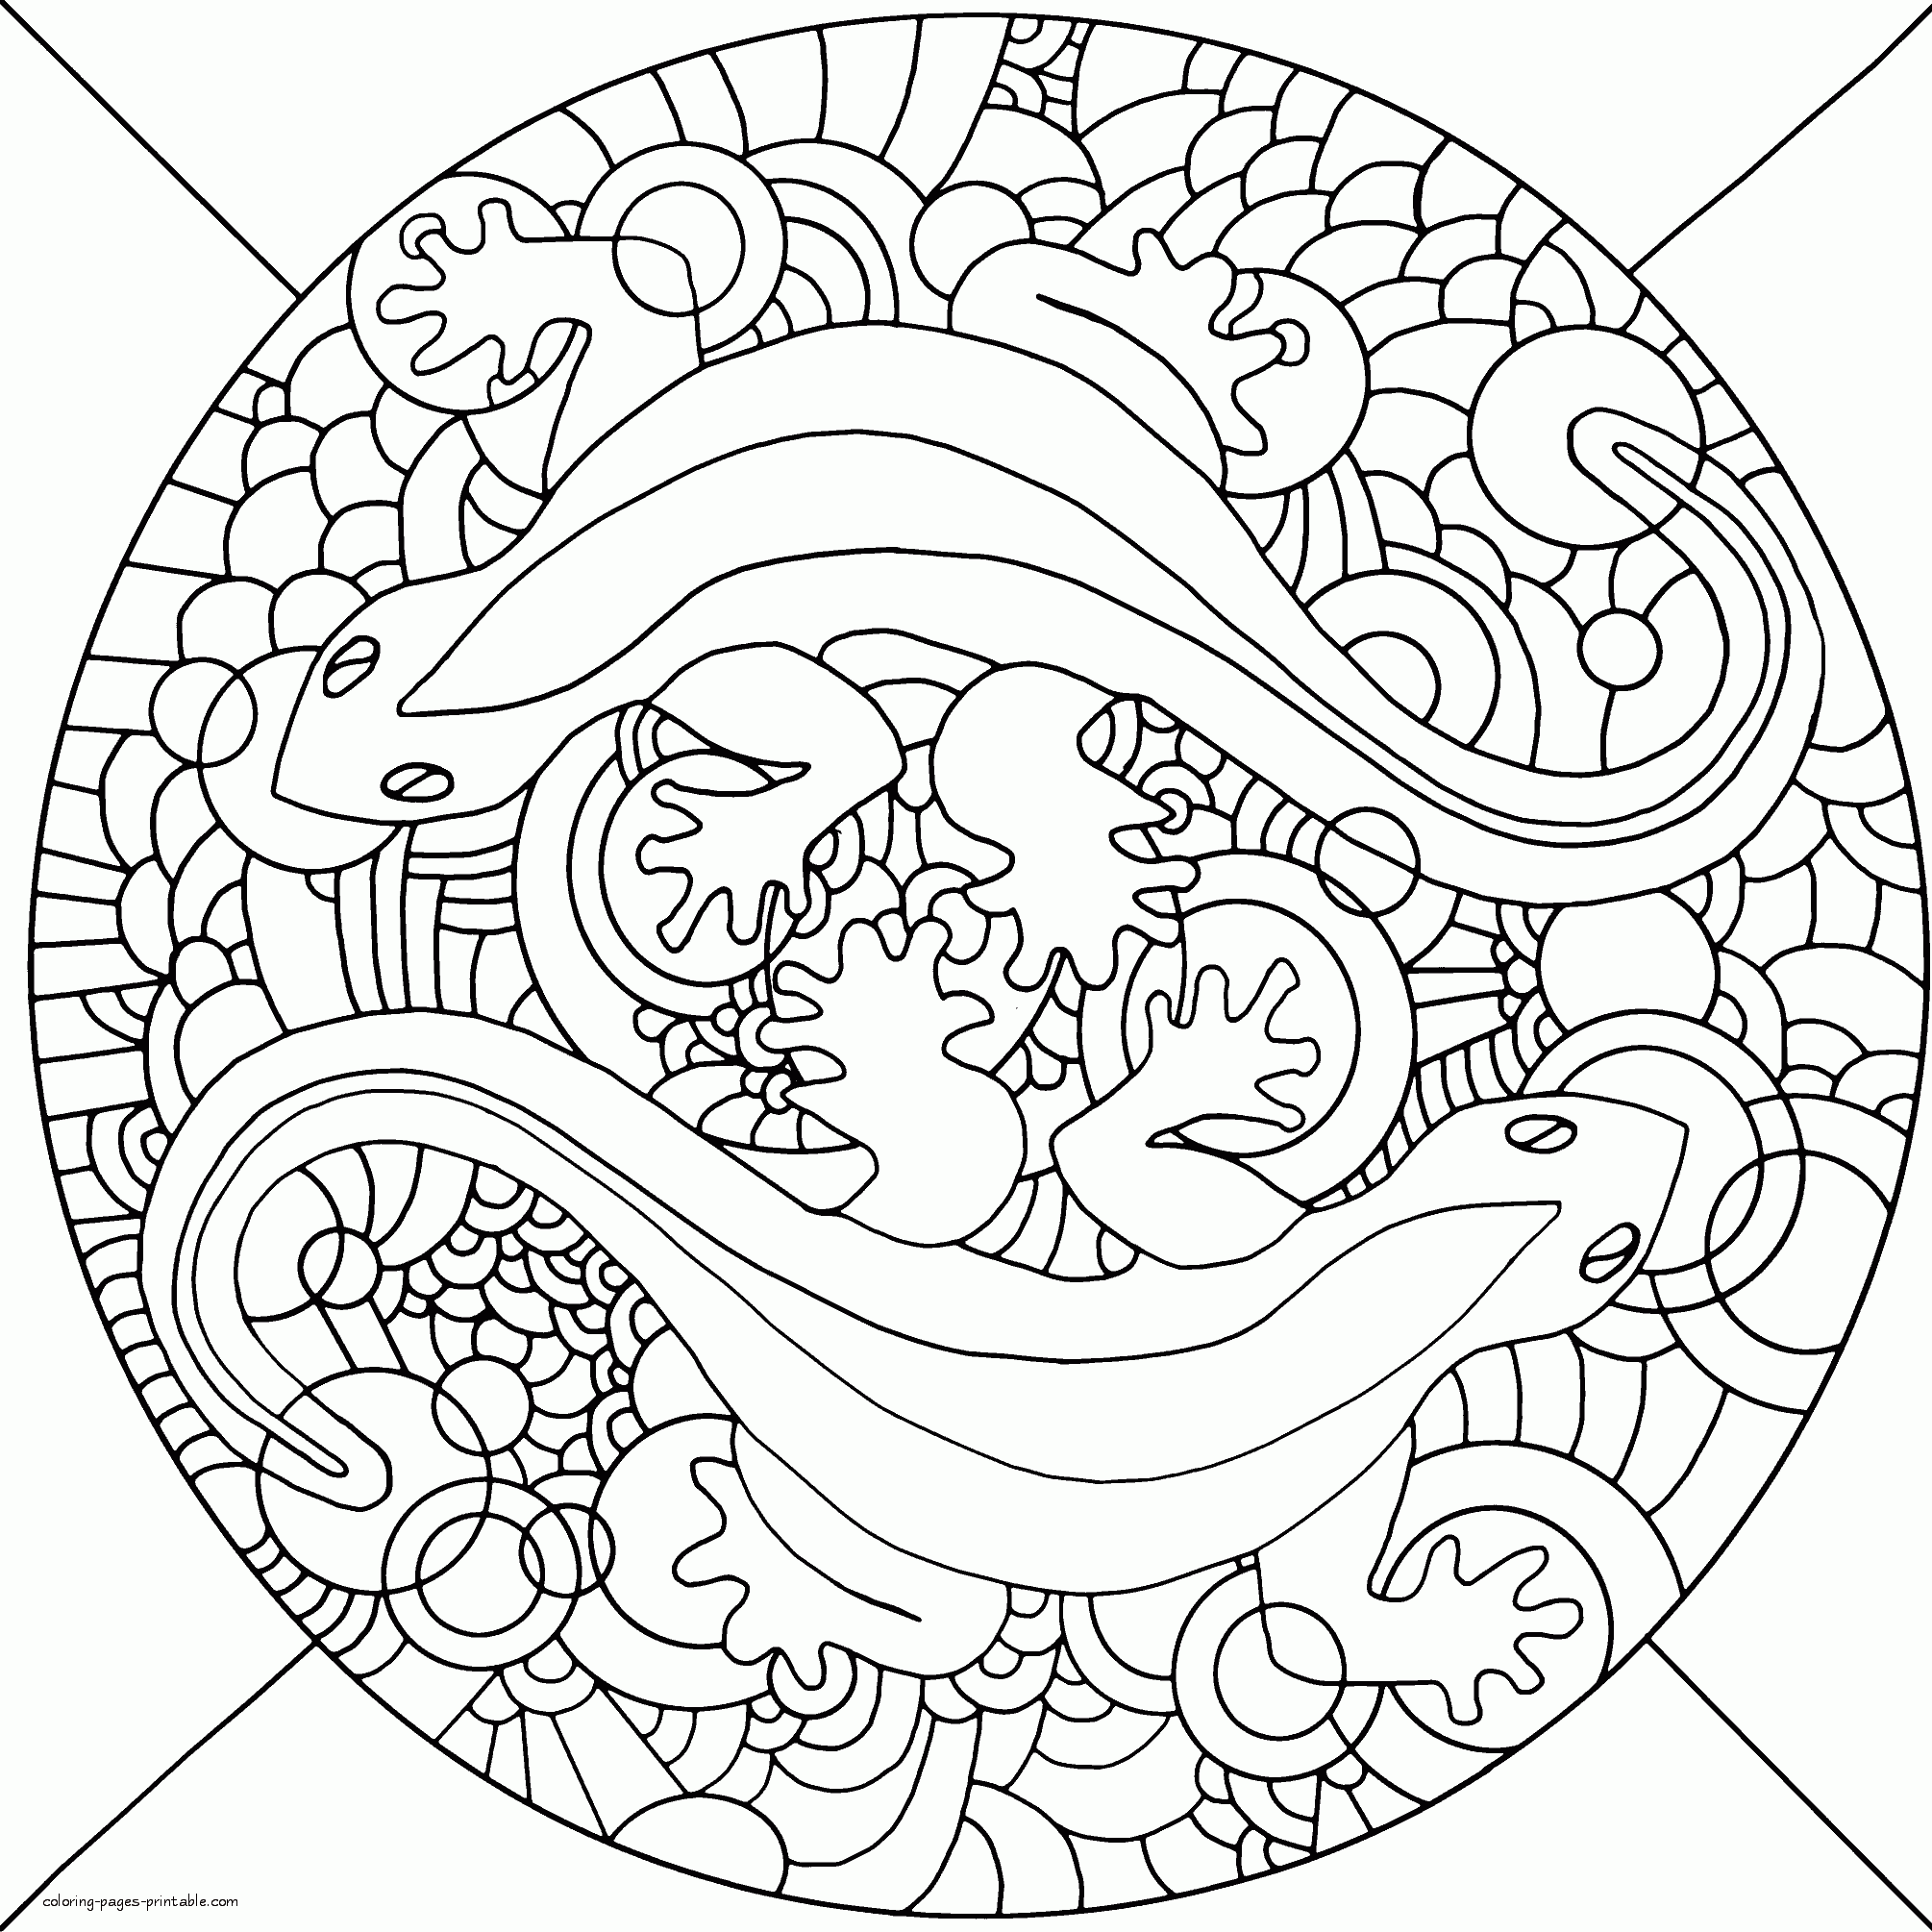 Spiksplinternieuw Lizards Coloring Page For Adults || COLORING-PAGES-PRINTABLE.COM JK-77